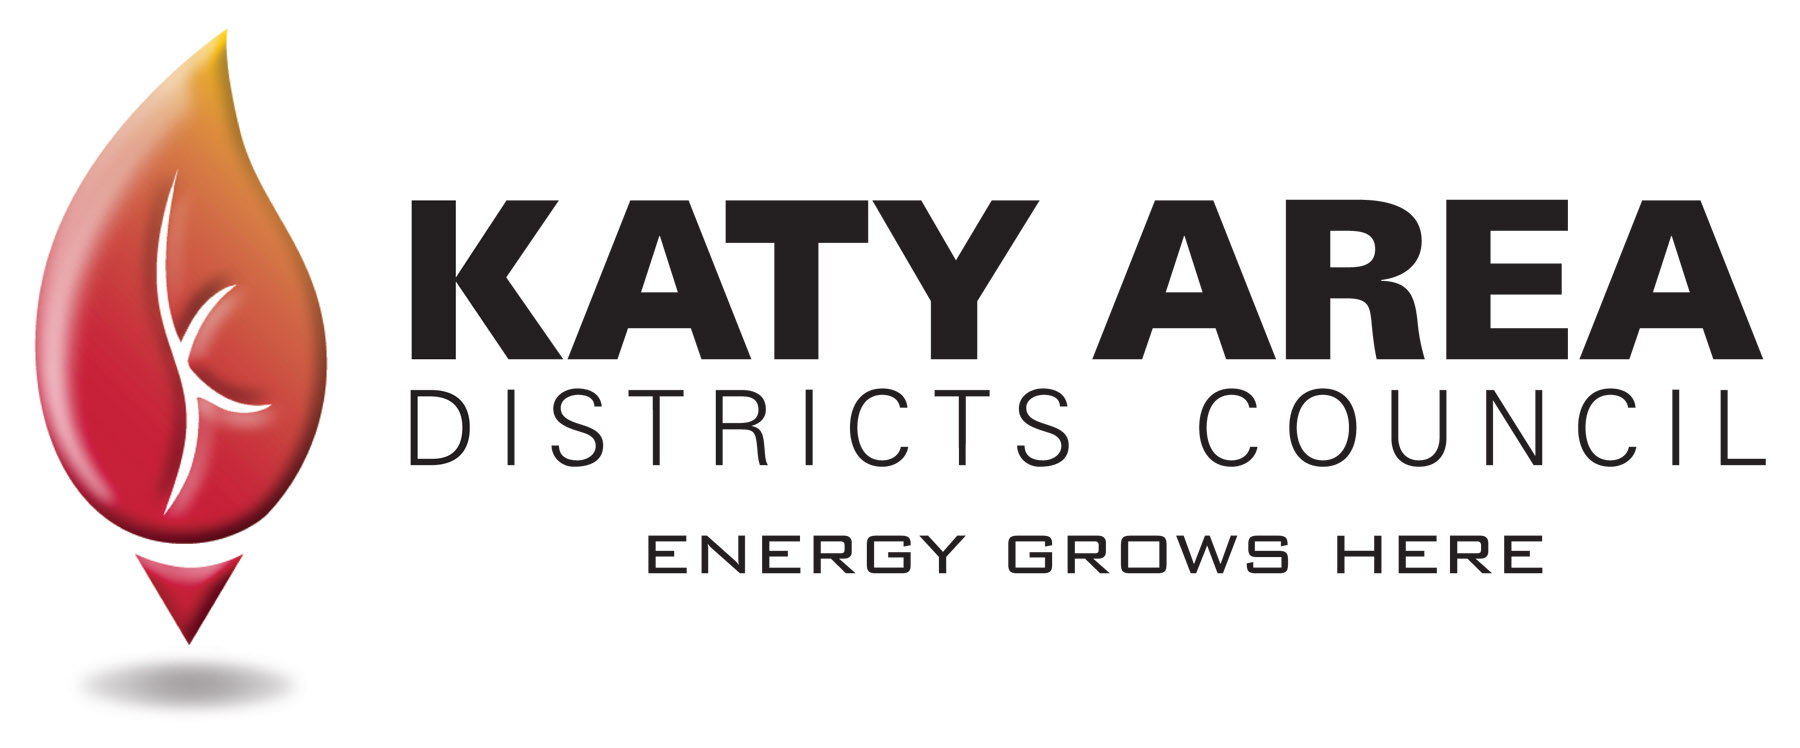 Katy Area Districts Council Slide Image